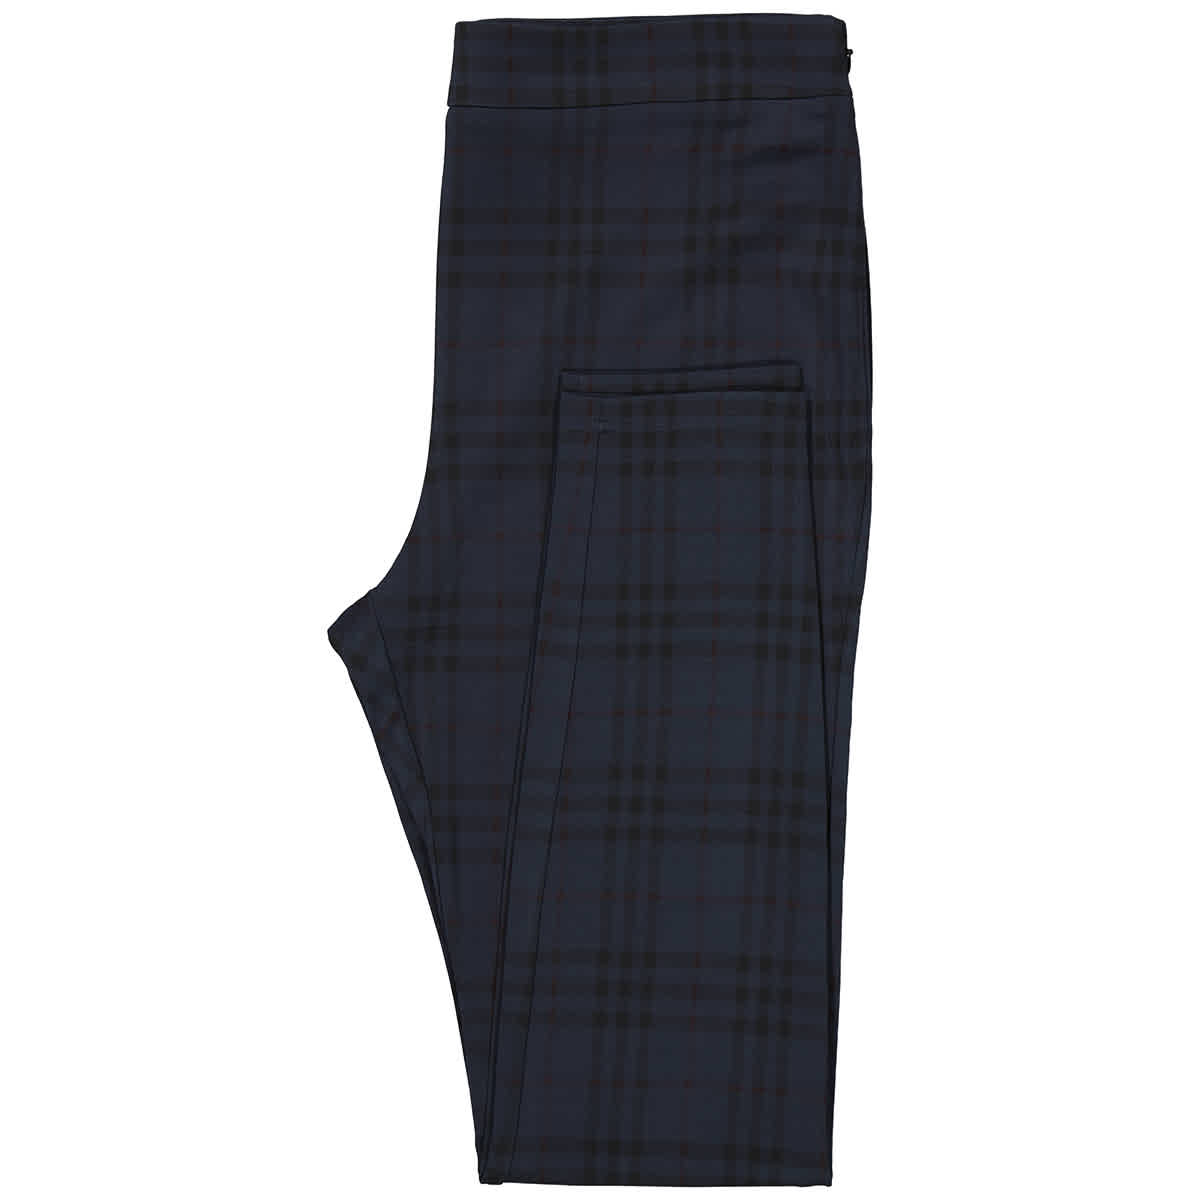 BURBERRY Checked stretch-jersey leggings